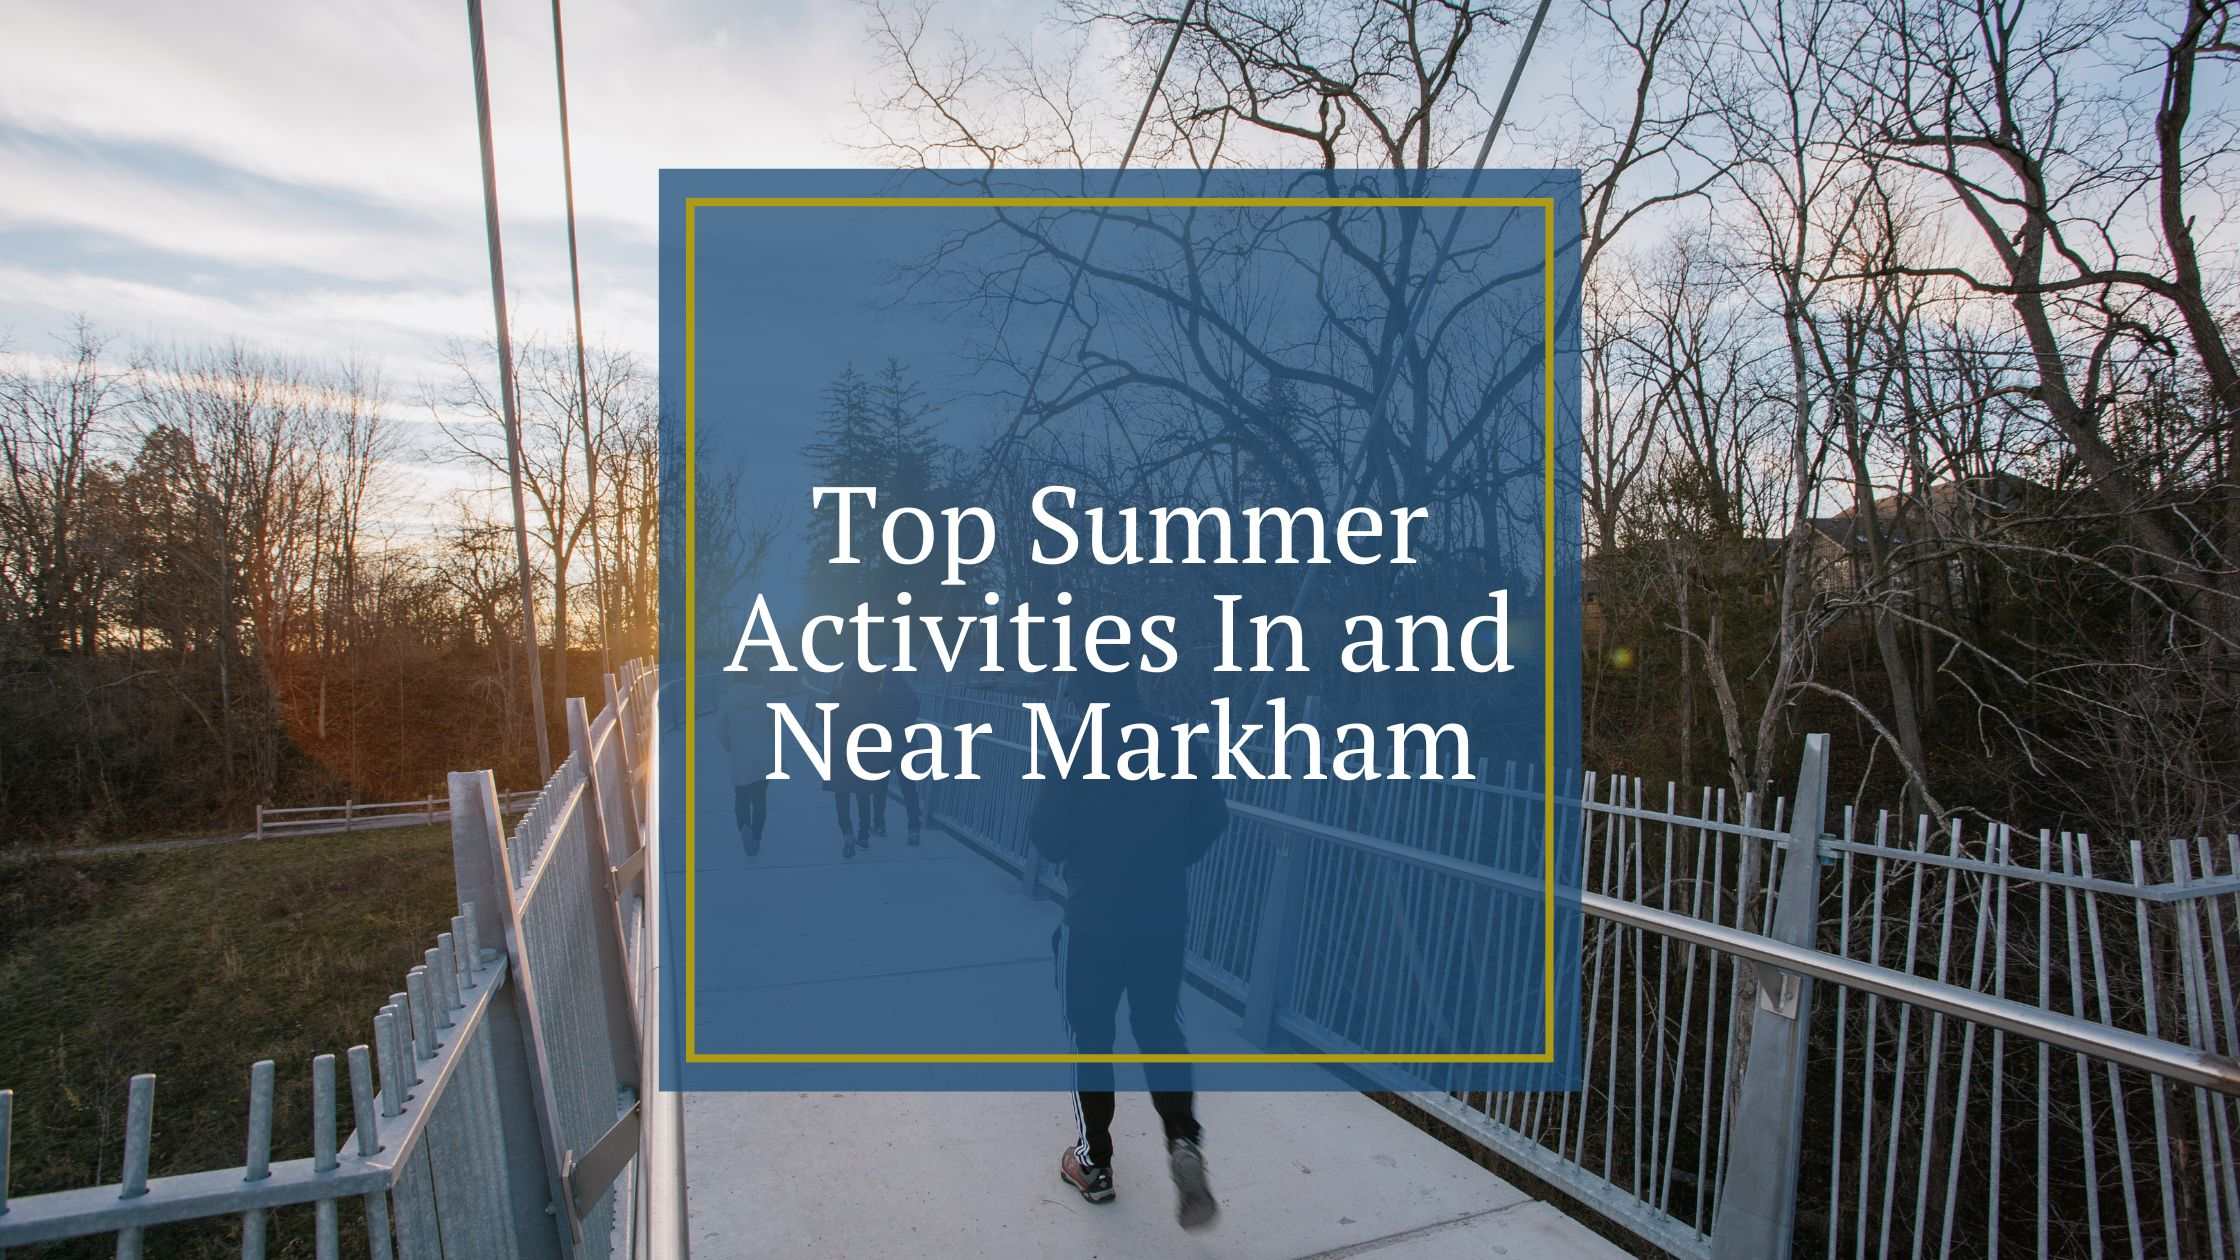 Top Summer Activities In and Near Markham